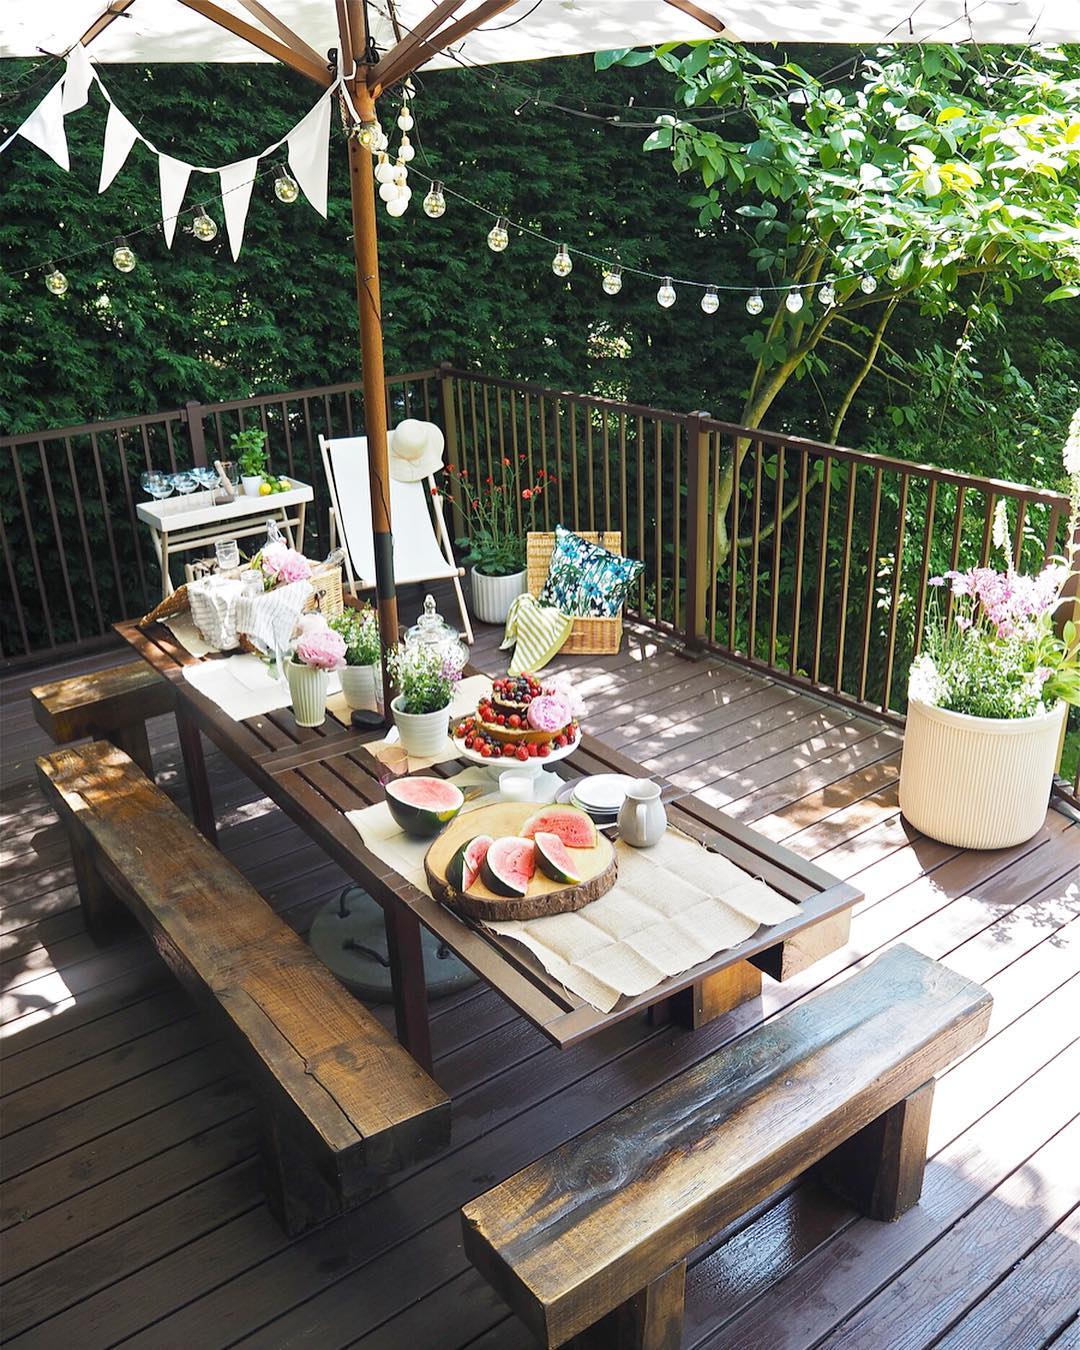 https://www.extraspace.com/blog/wp-content/uploads/2021/05/cookout-bbq-party-ideas-off-enough-seating.jpeg